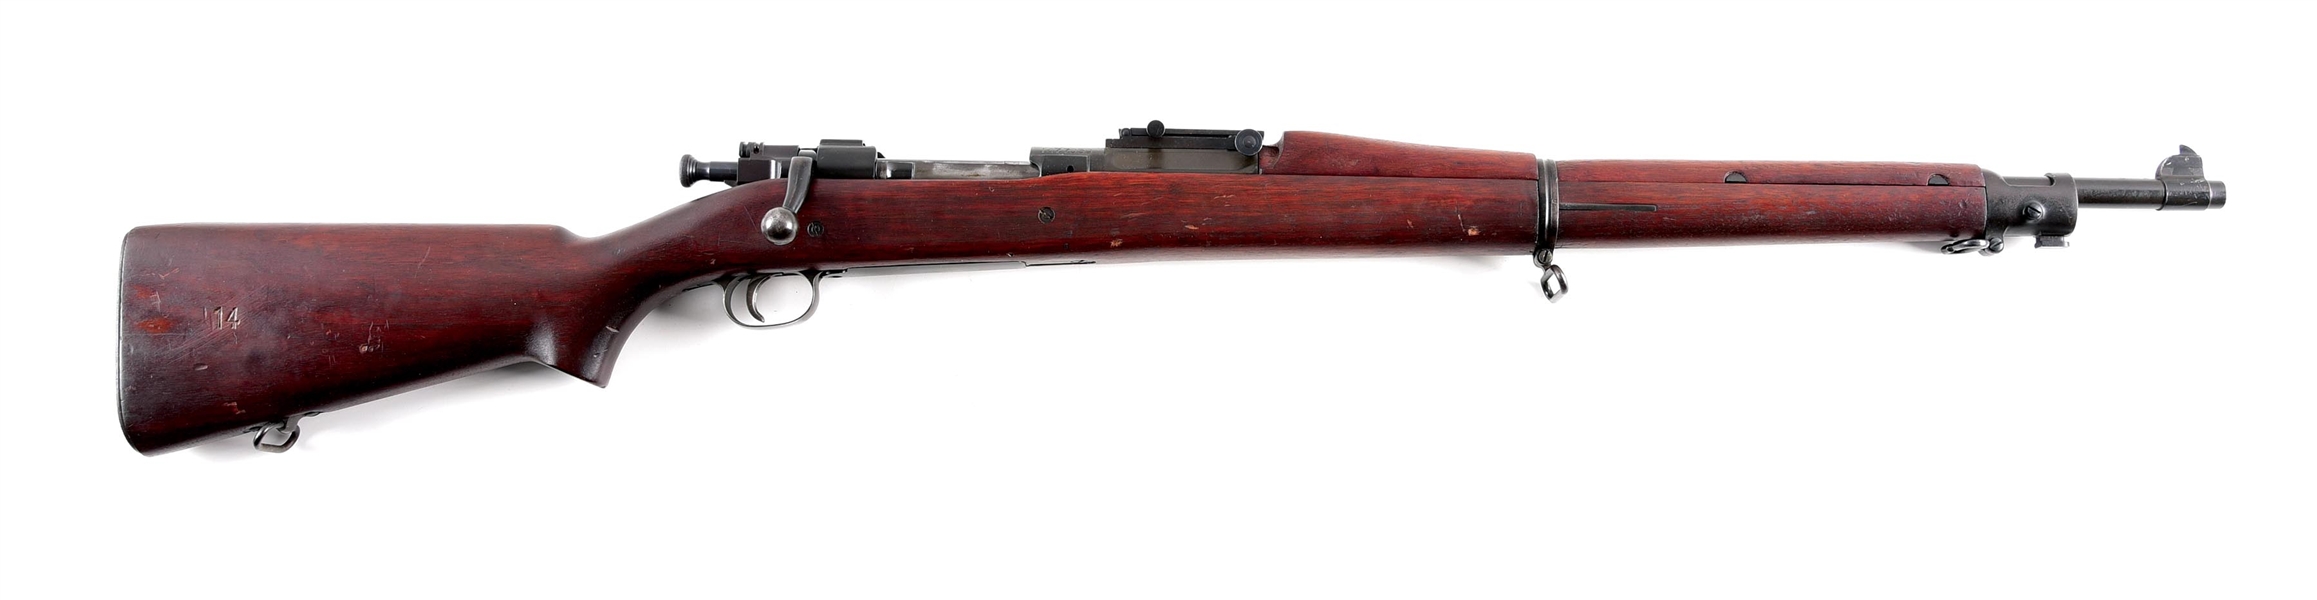 (C) SPRINGFIELD MODEL 1903 A1 BOLT ACTION RIFLE.